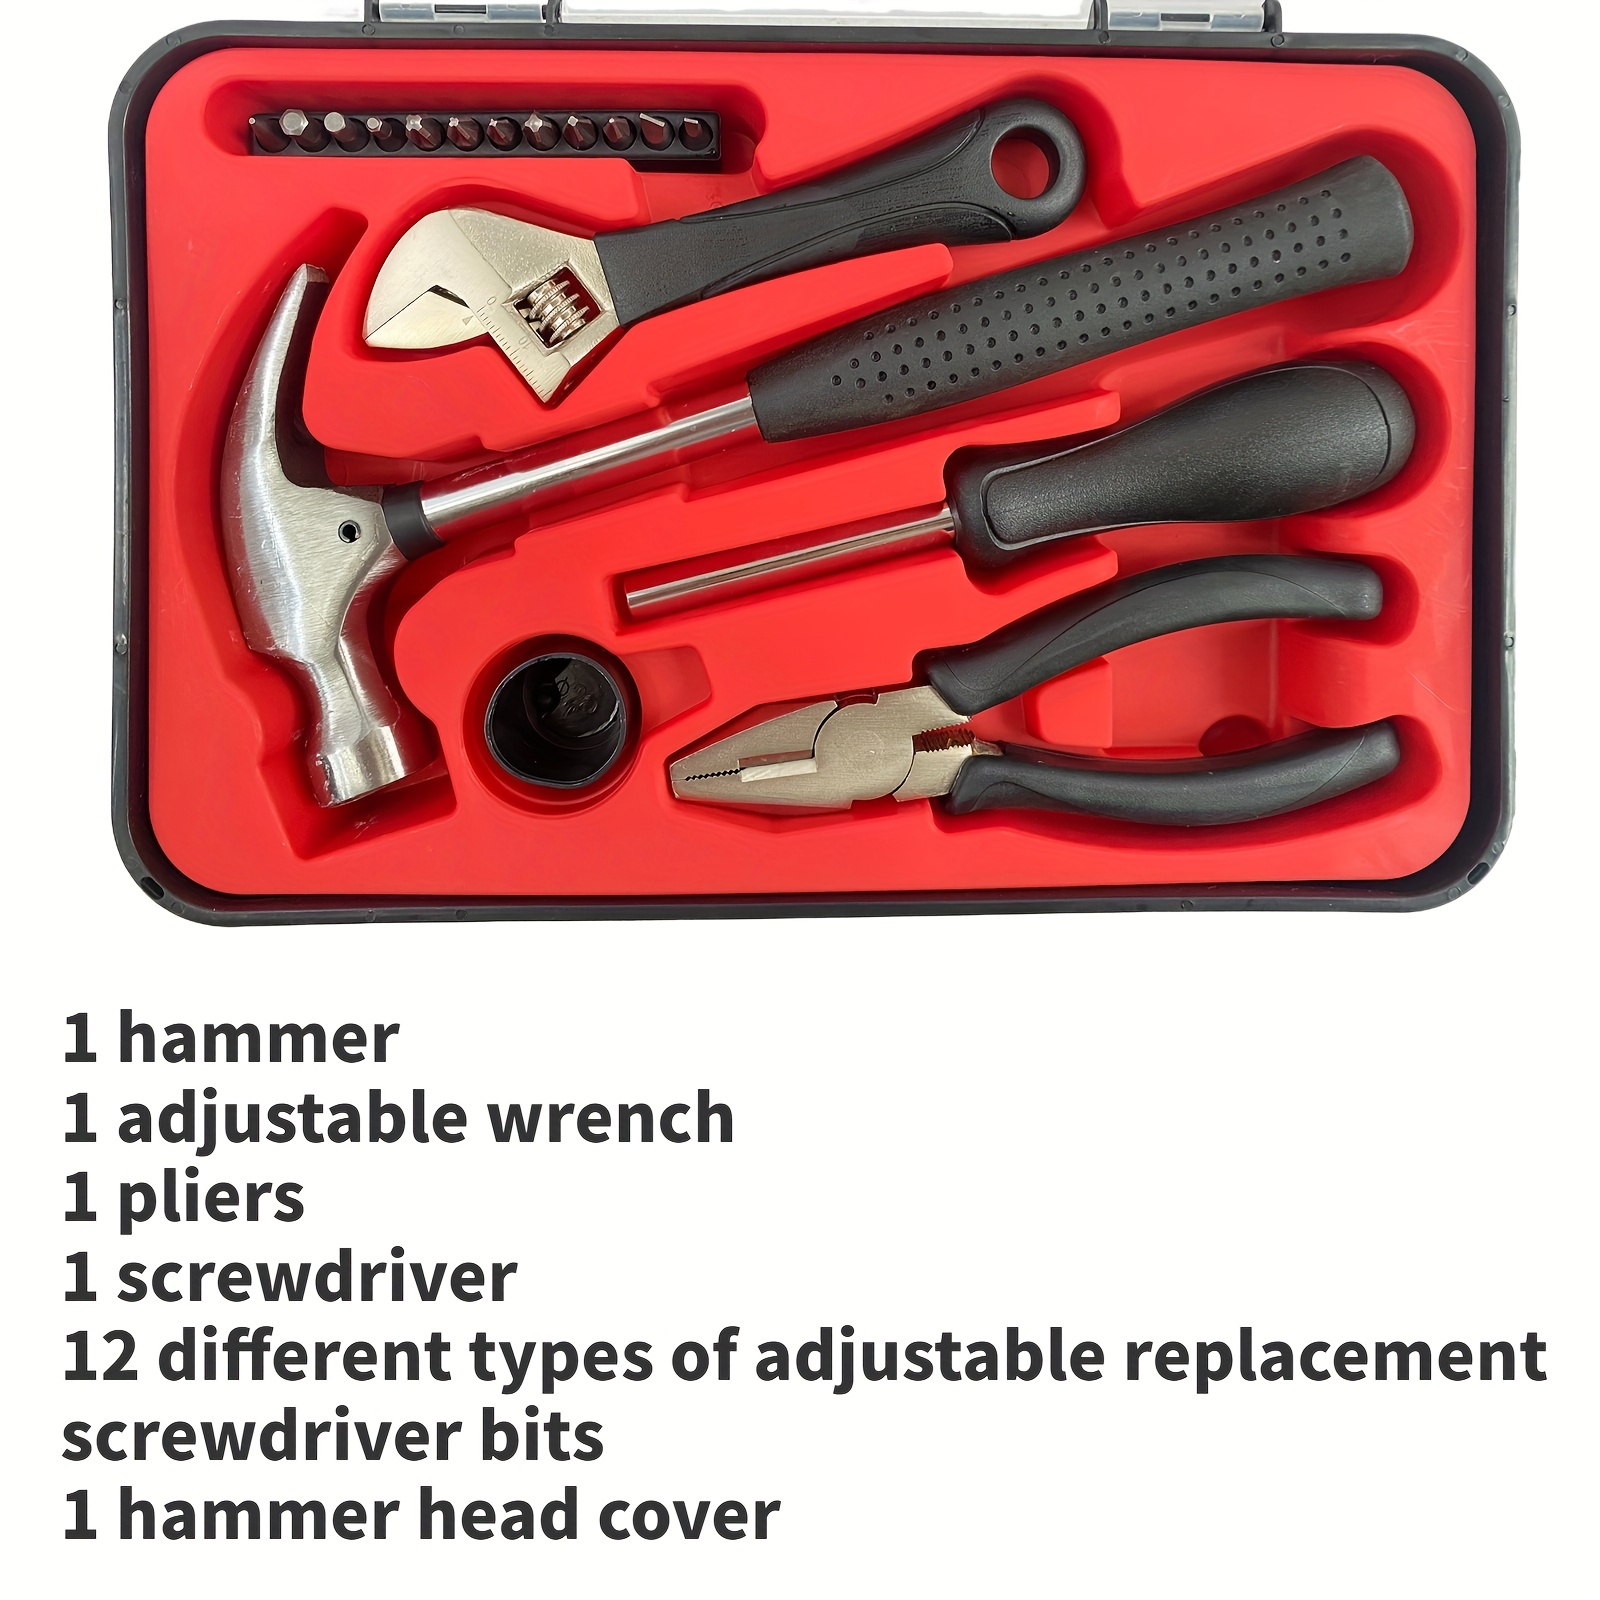 Basic tool kit. Set of 17 pieces. Screwdriver, pliers, hammer